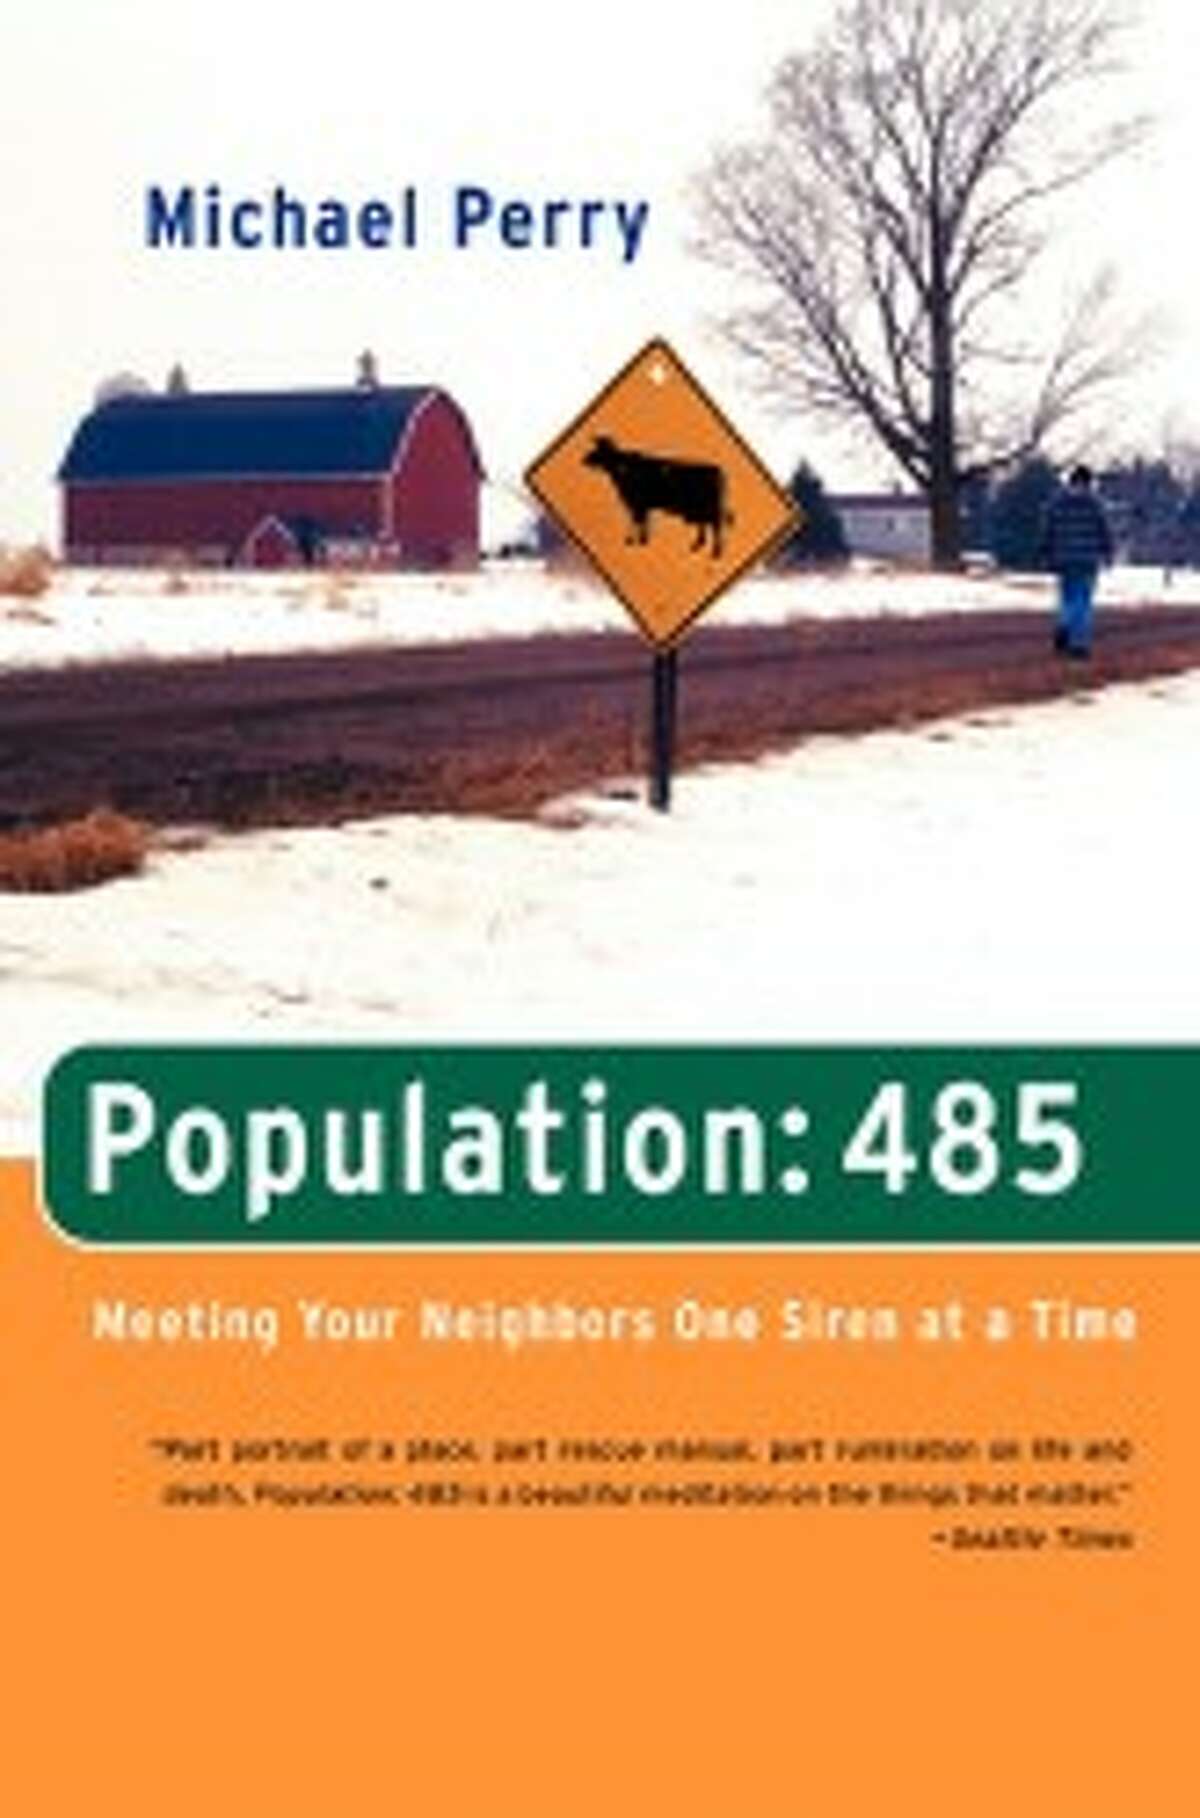 Excerpts from the book “Population 485,” which chronicles the life of a small-town volunteer fire department, will be read at the Bear Lake Township fire hall at 7 p.m. on World Book Night, Tuesday, April 23.